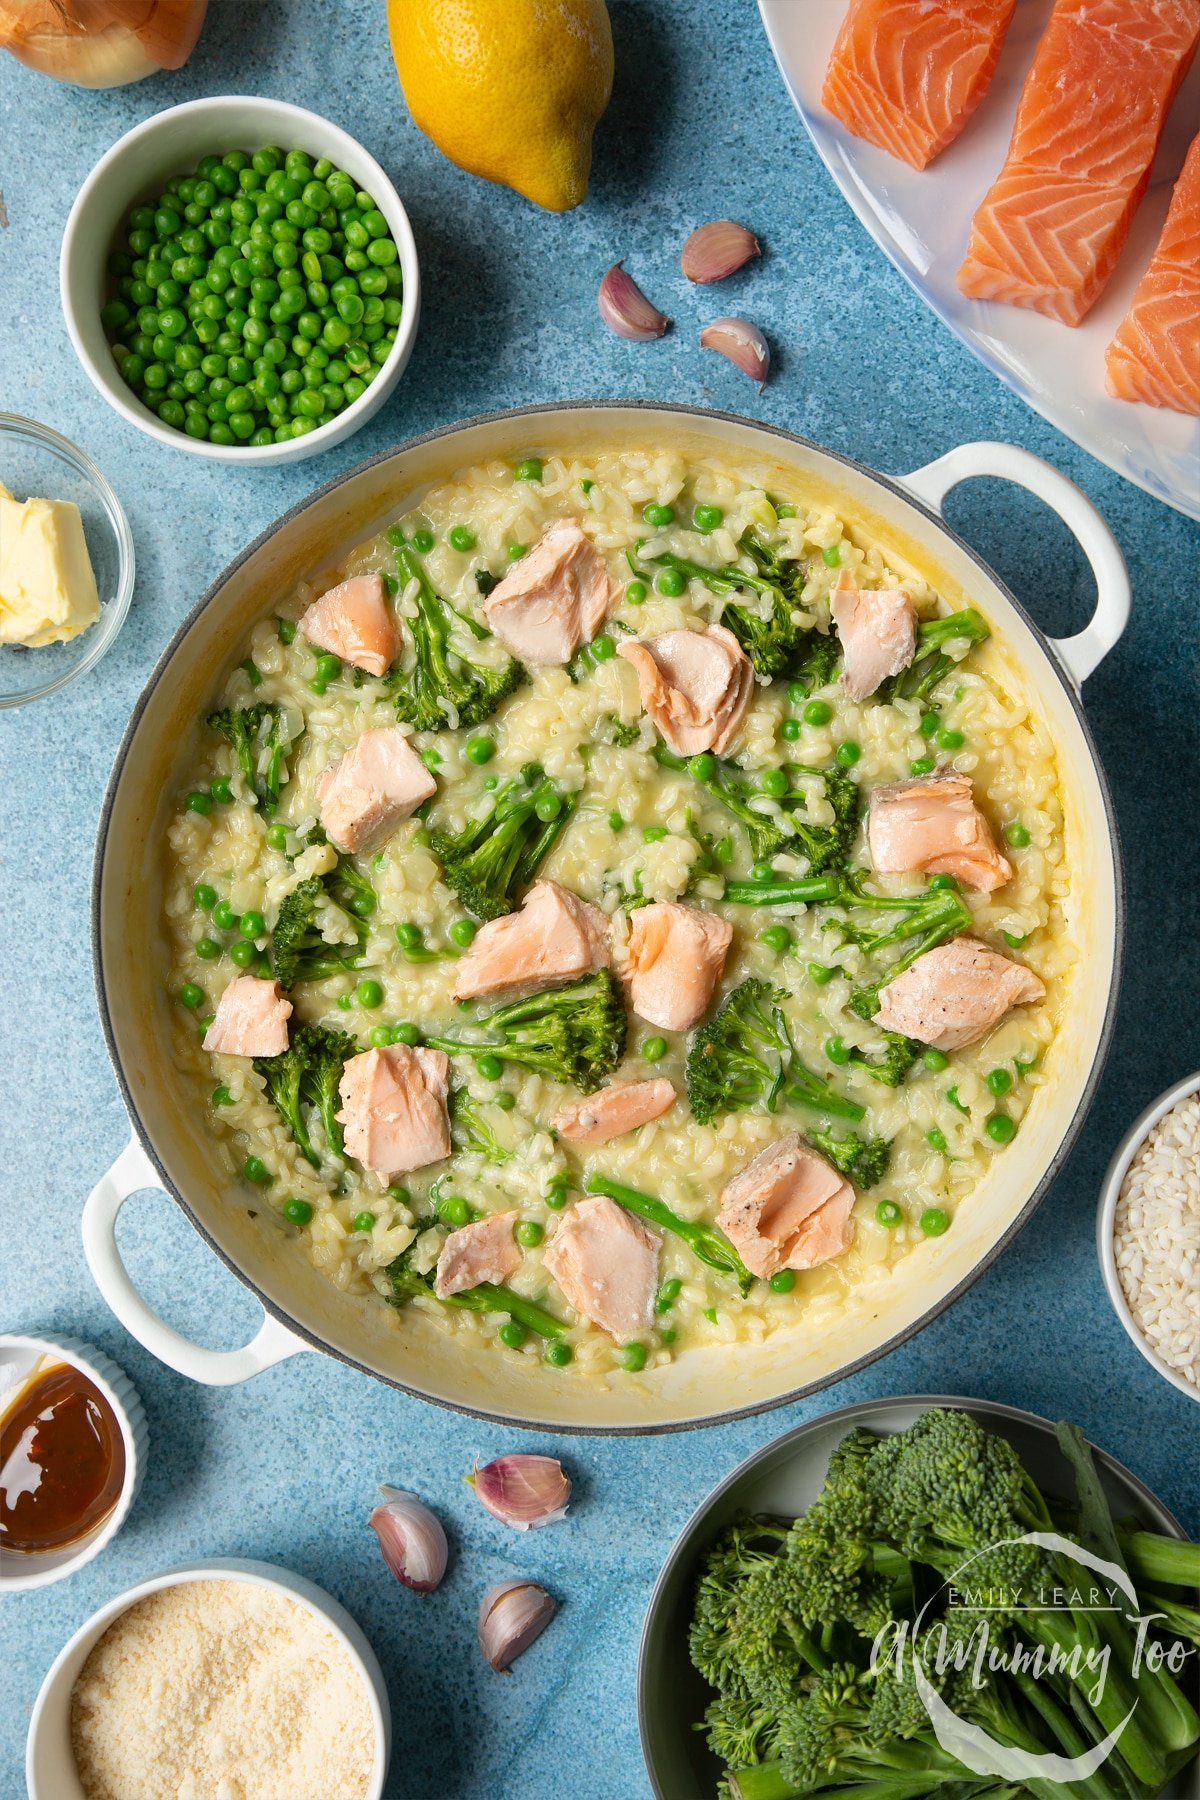 Freshly cooked risotto with peas and Tenderstem broccoli and pieces of salmon flaked on top in a large cream-colour pan. Ingredients to make salmon risotto surround the pan.